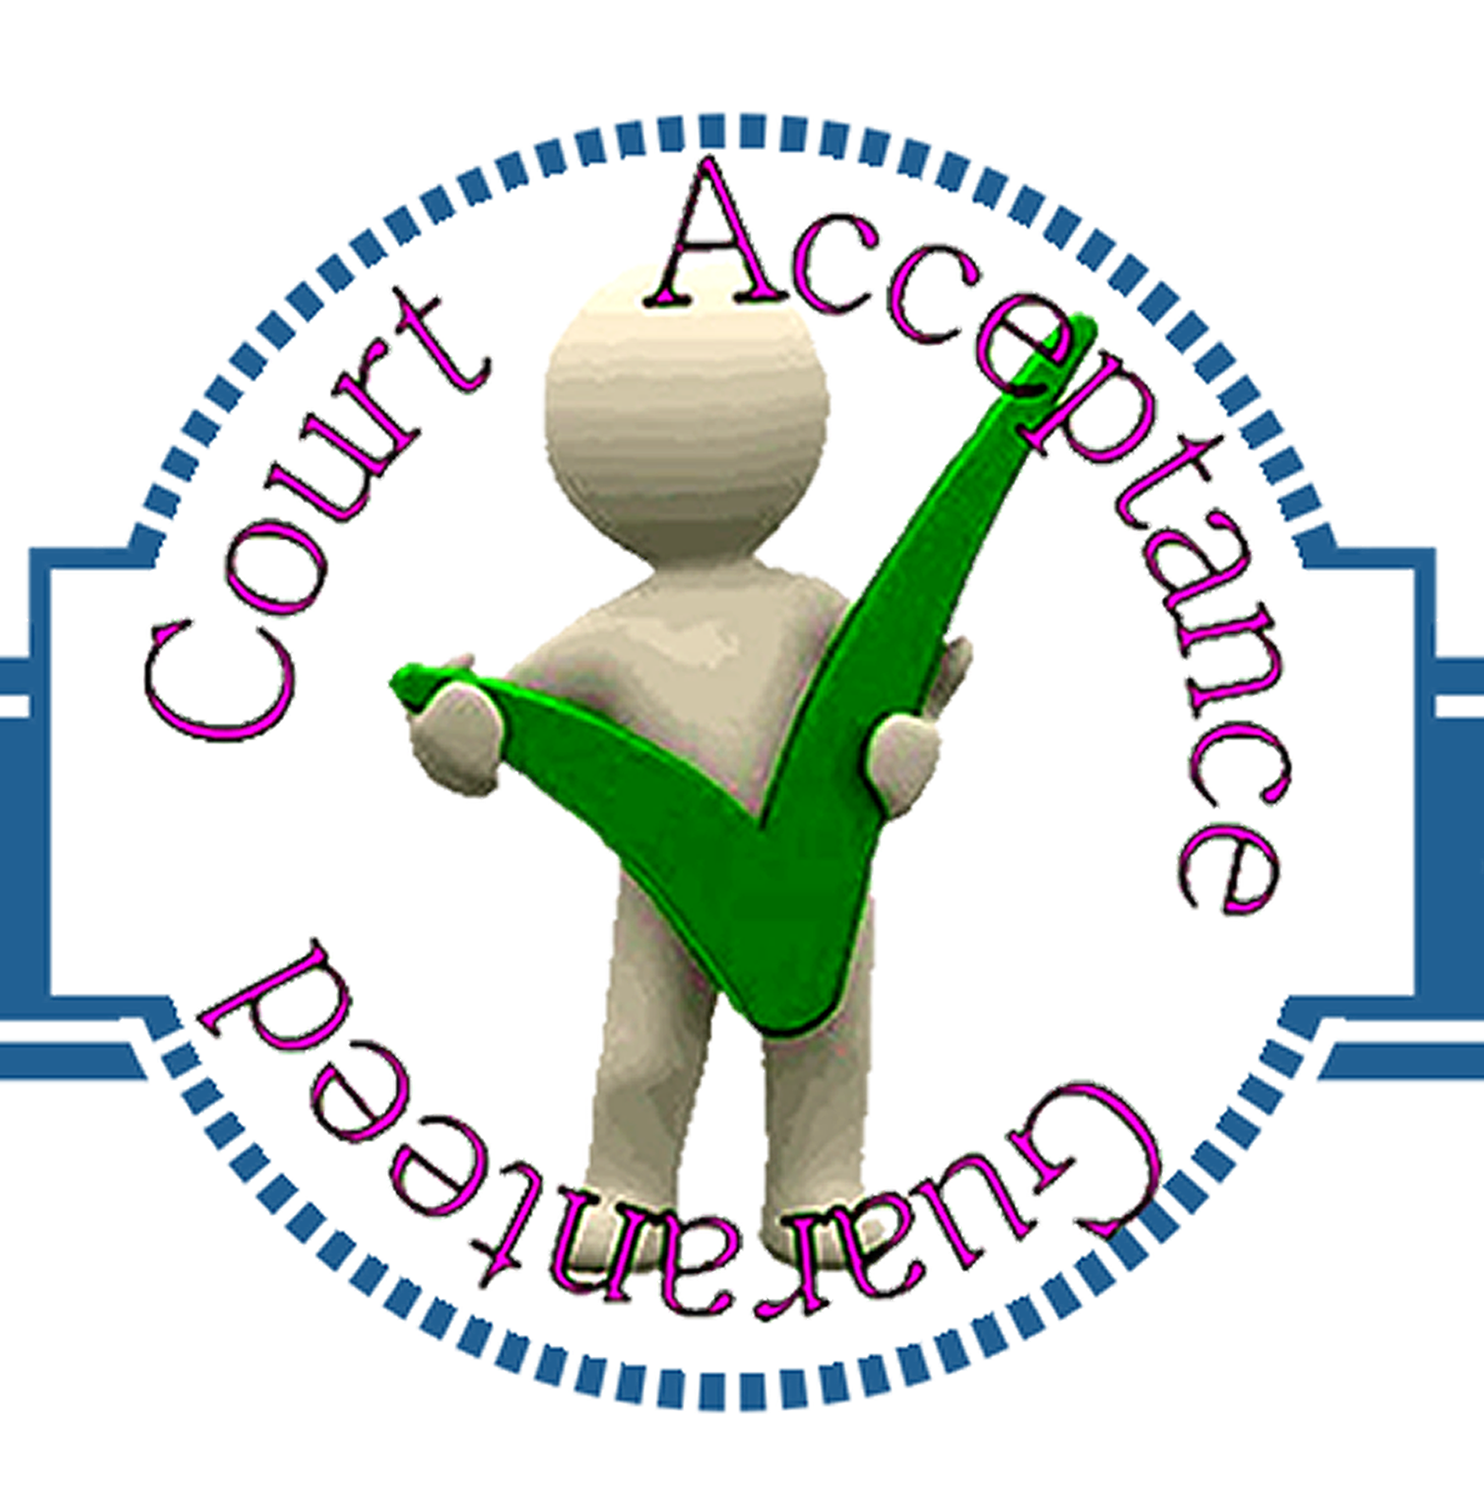 Nationally Certified accepted Court Programs